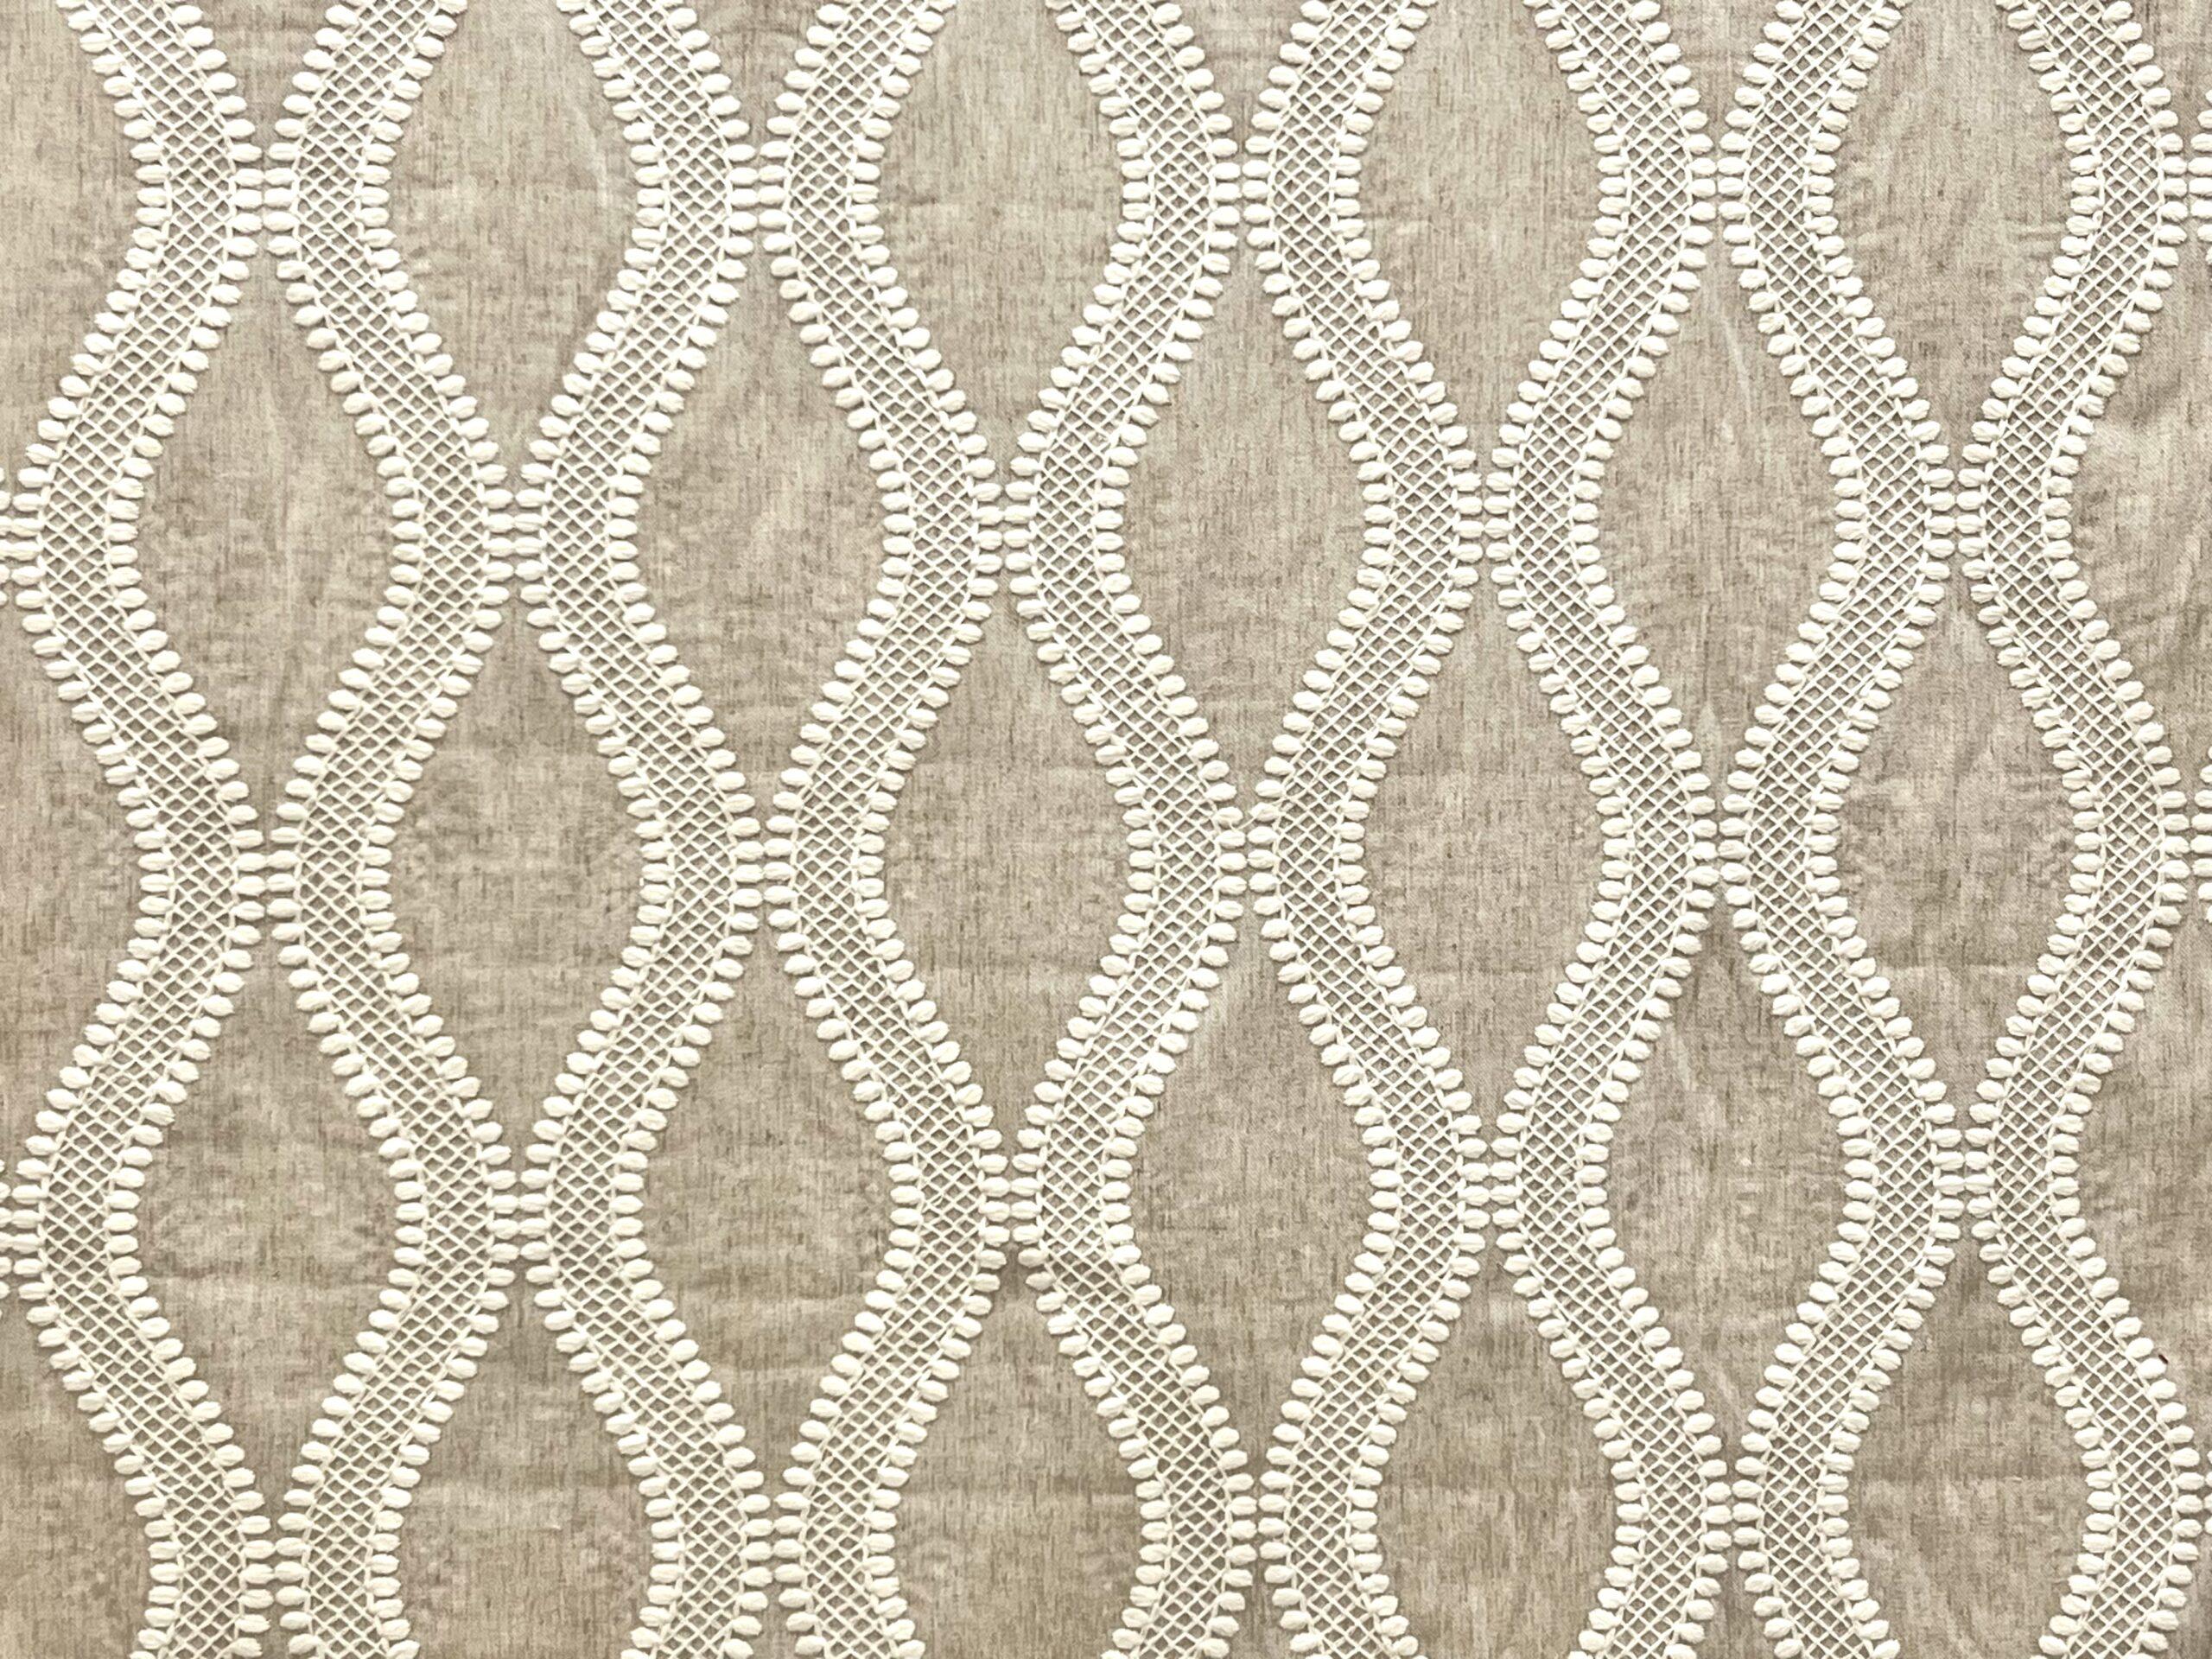 Cleo Natural Embroidered Home Decor Fabric - RichTex Fabrics & Furnishings